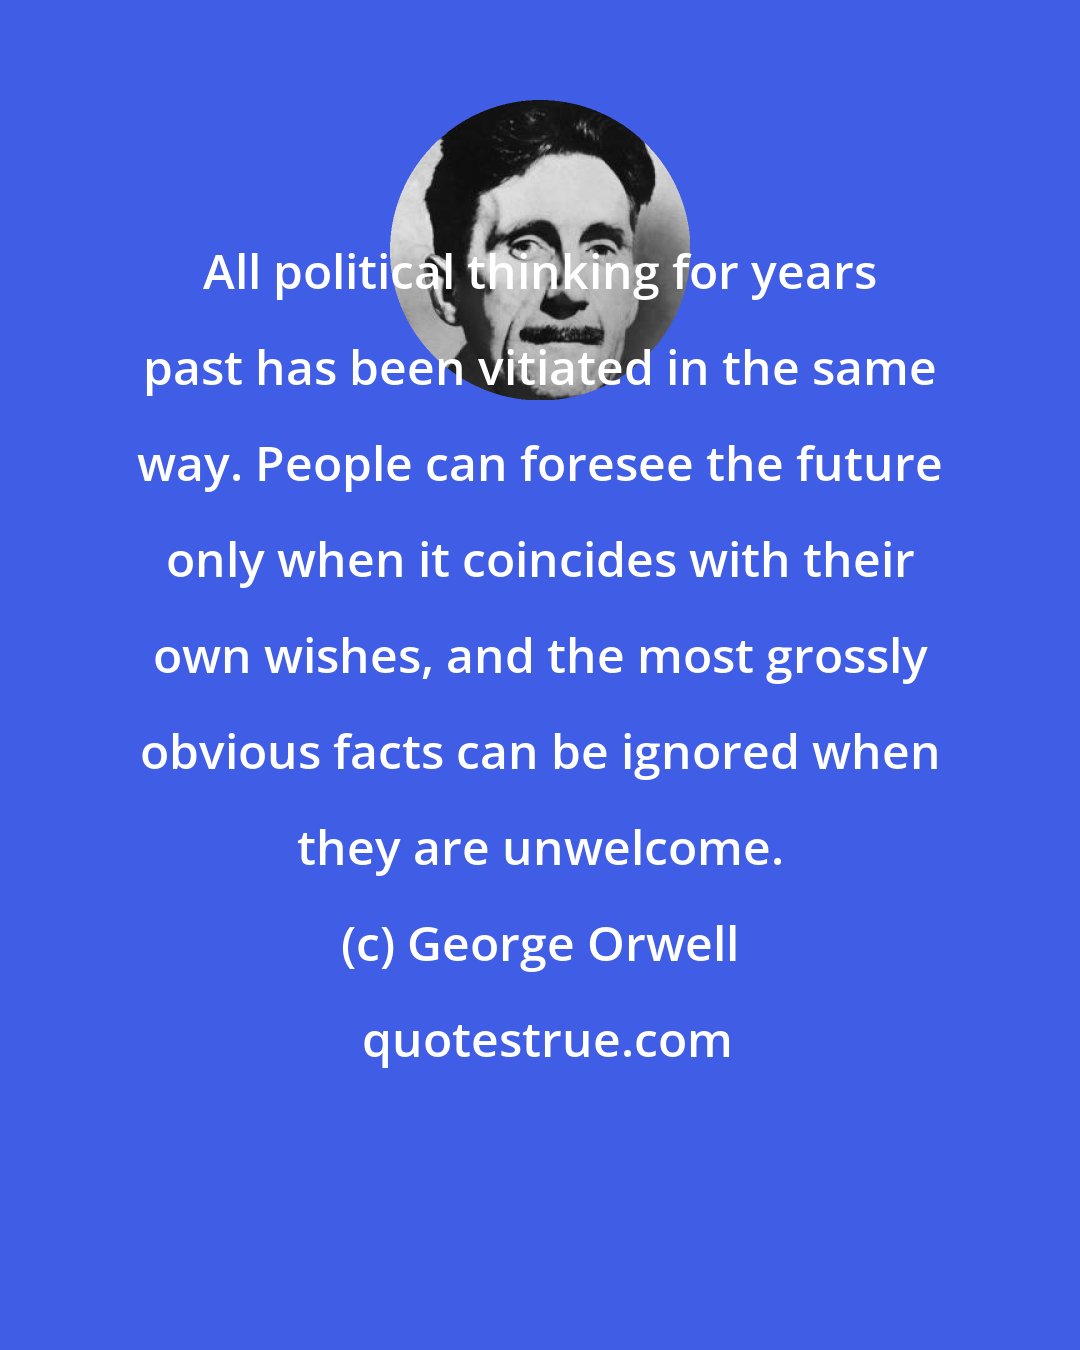 George Orwell: All political thinking for years past has been vitiated in the same way. People can foresee the future only when it coincides with their own wishes, and the most grossly obvious facts can be ignored when they are unwelcome.